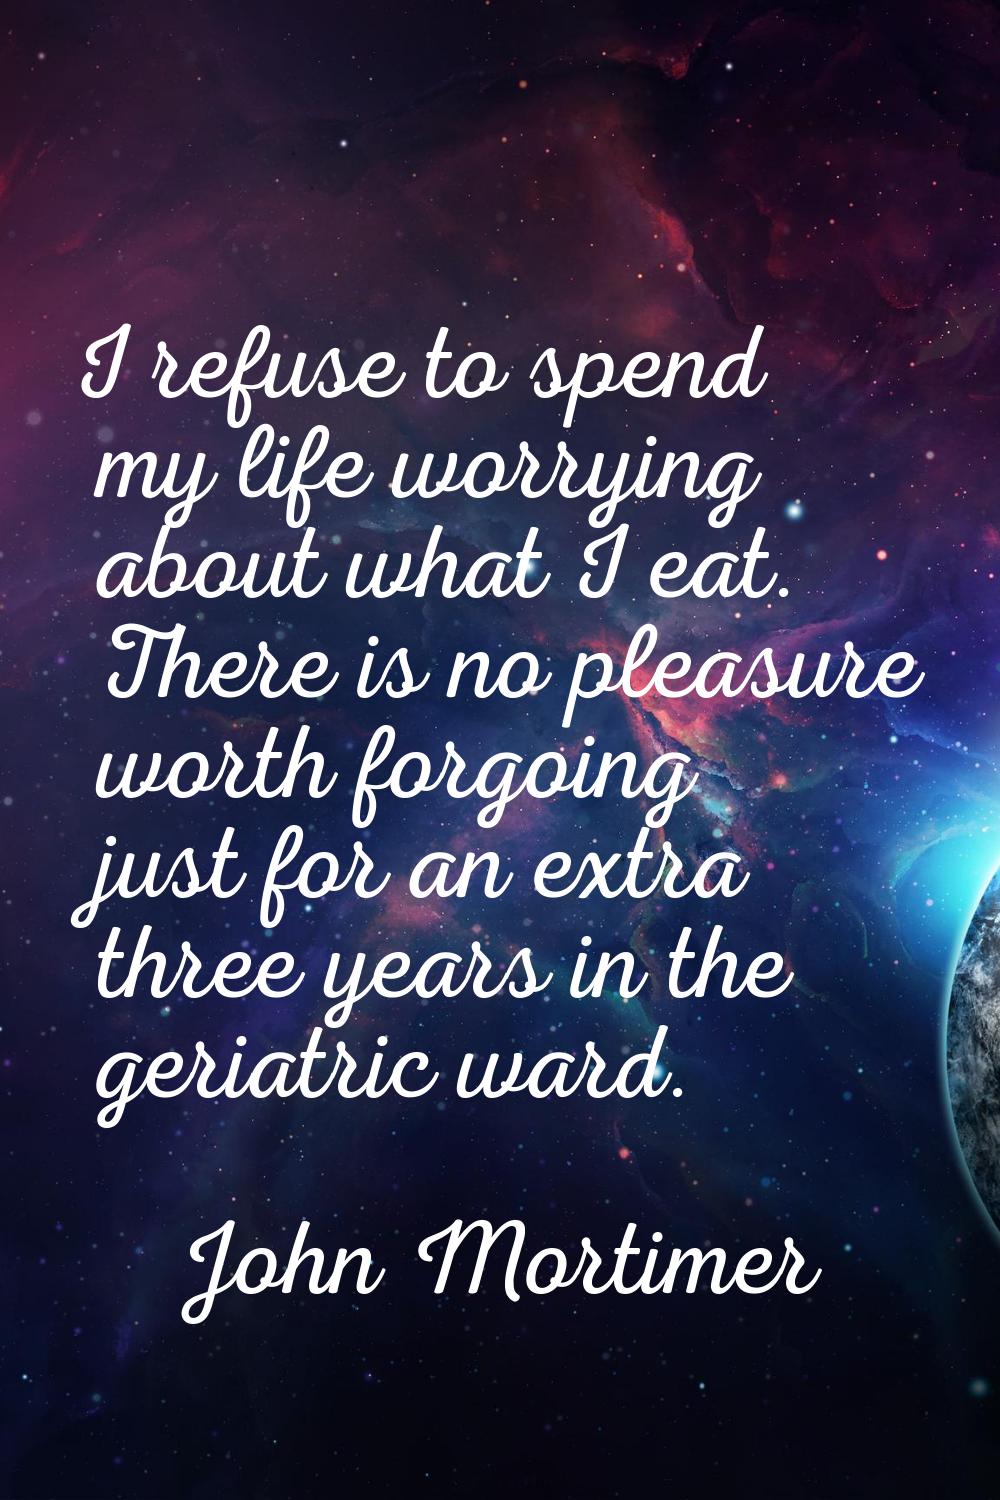 I refuse to spend my life worrying about what I eat. There is no pleasure worth forgoing just for a